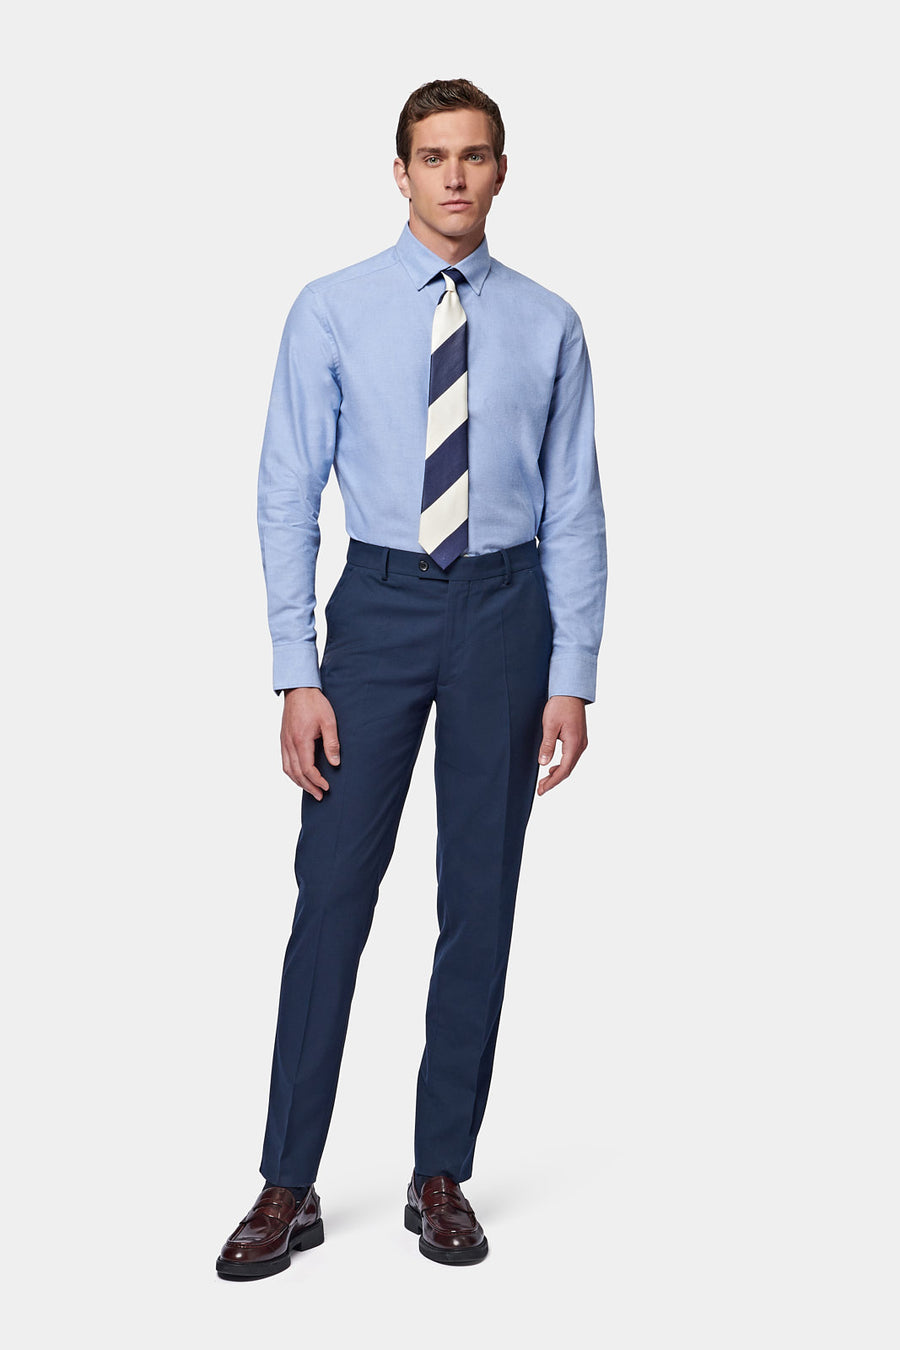 Classic Plain Front Trouser in Navy Blue